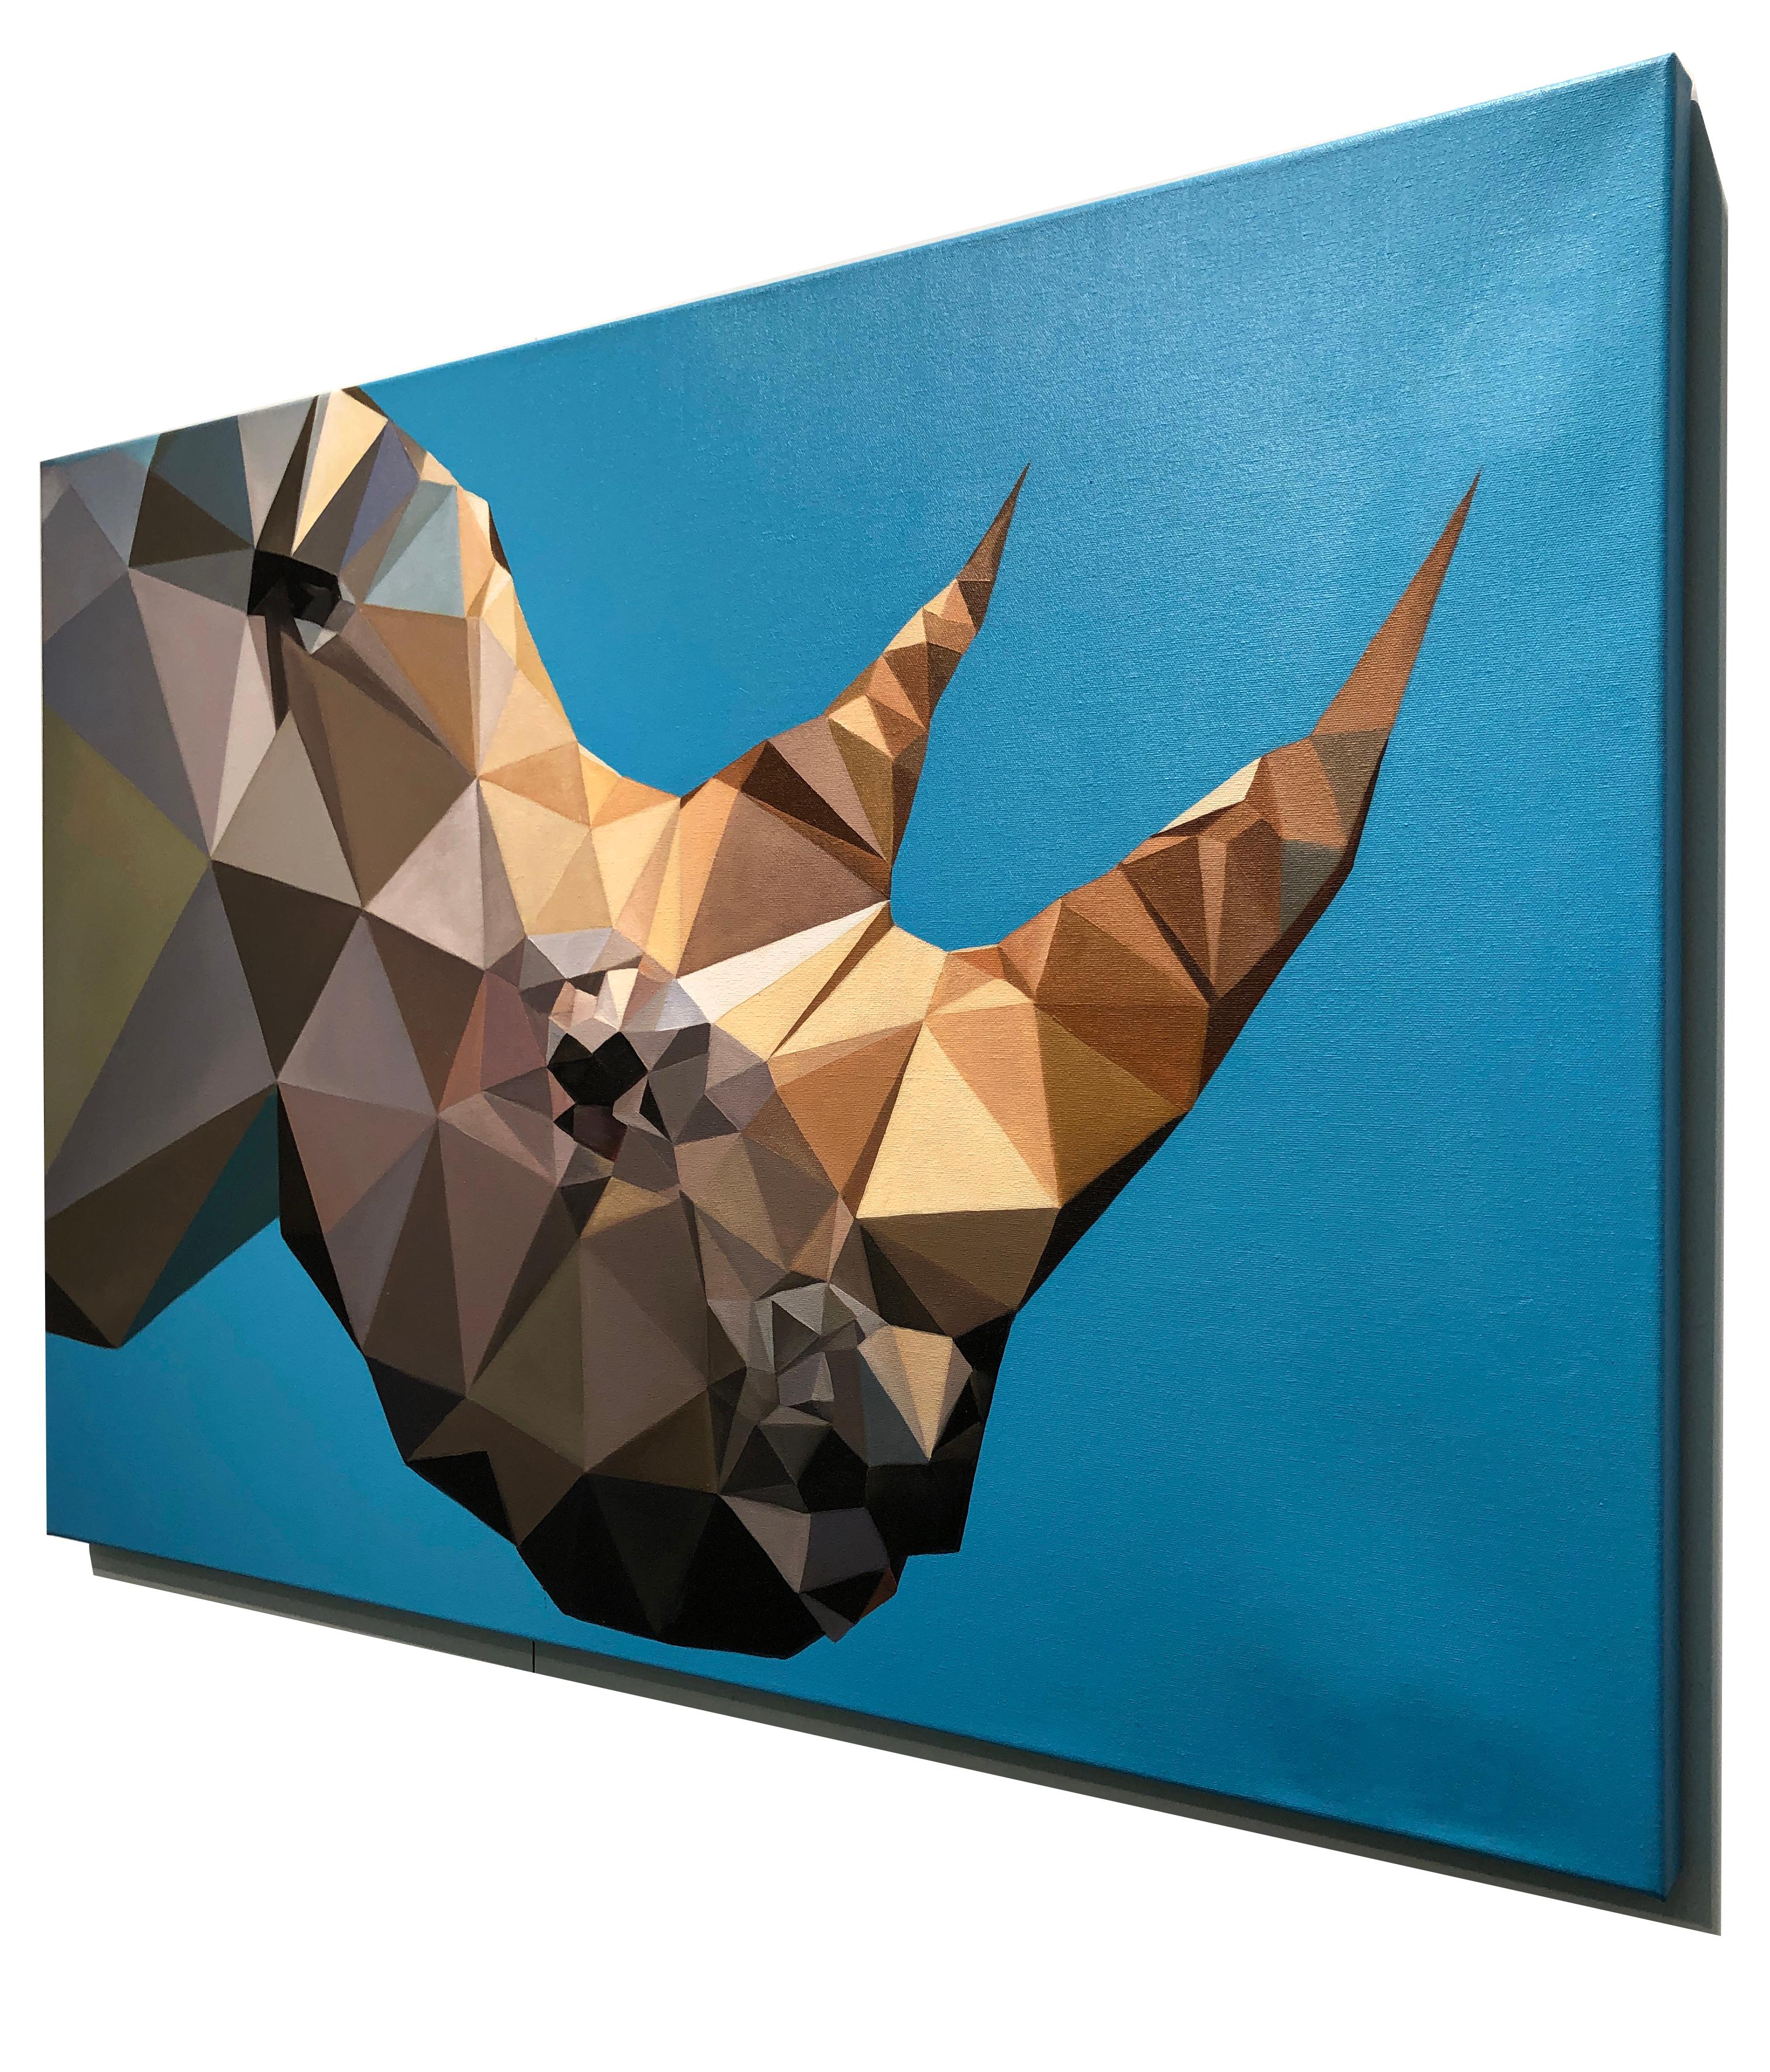  Rhino Blues by KARTEL Oil on canvas pop art triangulated, animal painting  For Sale 2